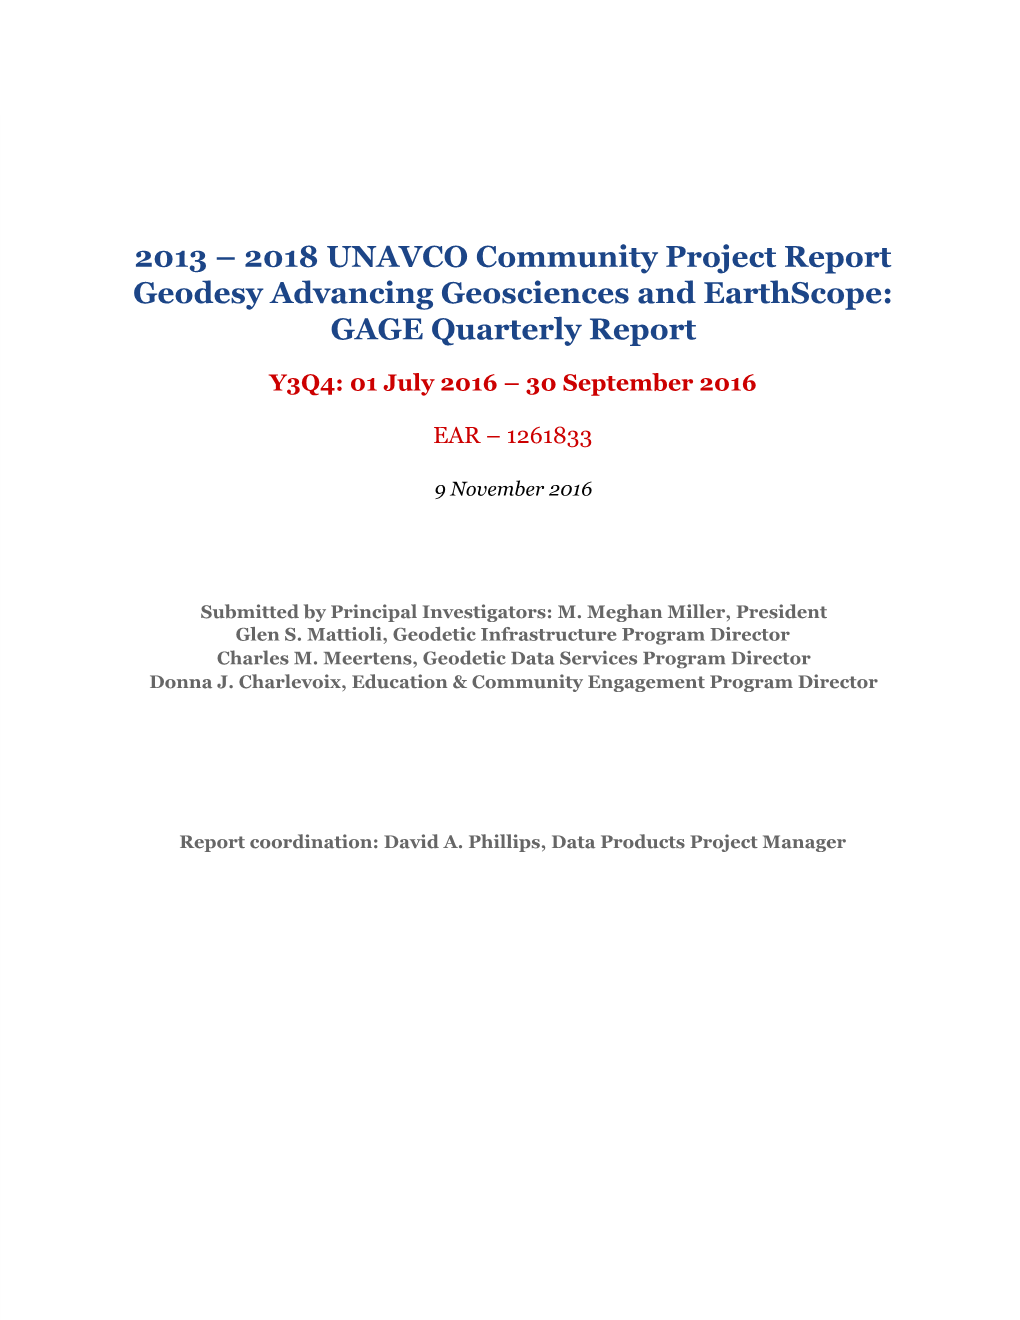 2013 – 2018 UNAVCO Community Project Report Geodesy Advancing Geosciences and Earthscope: GAGE Quarterly Report